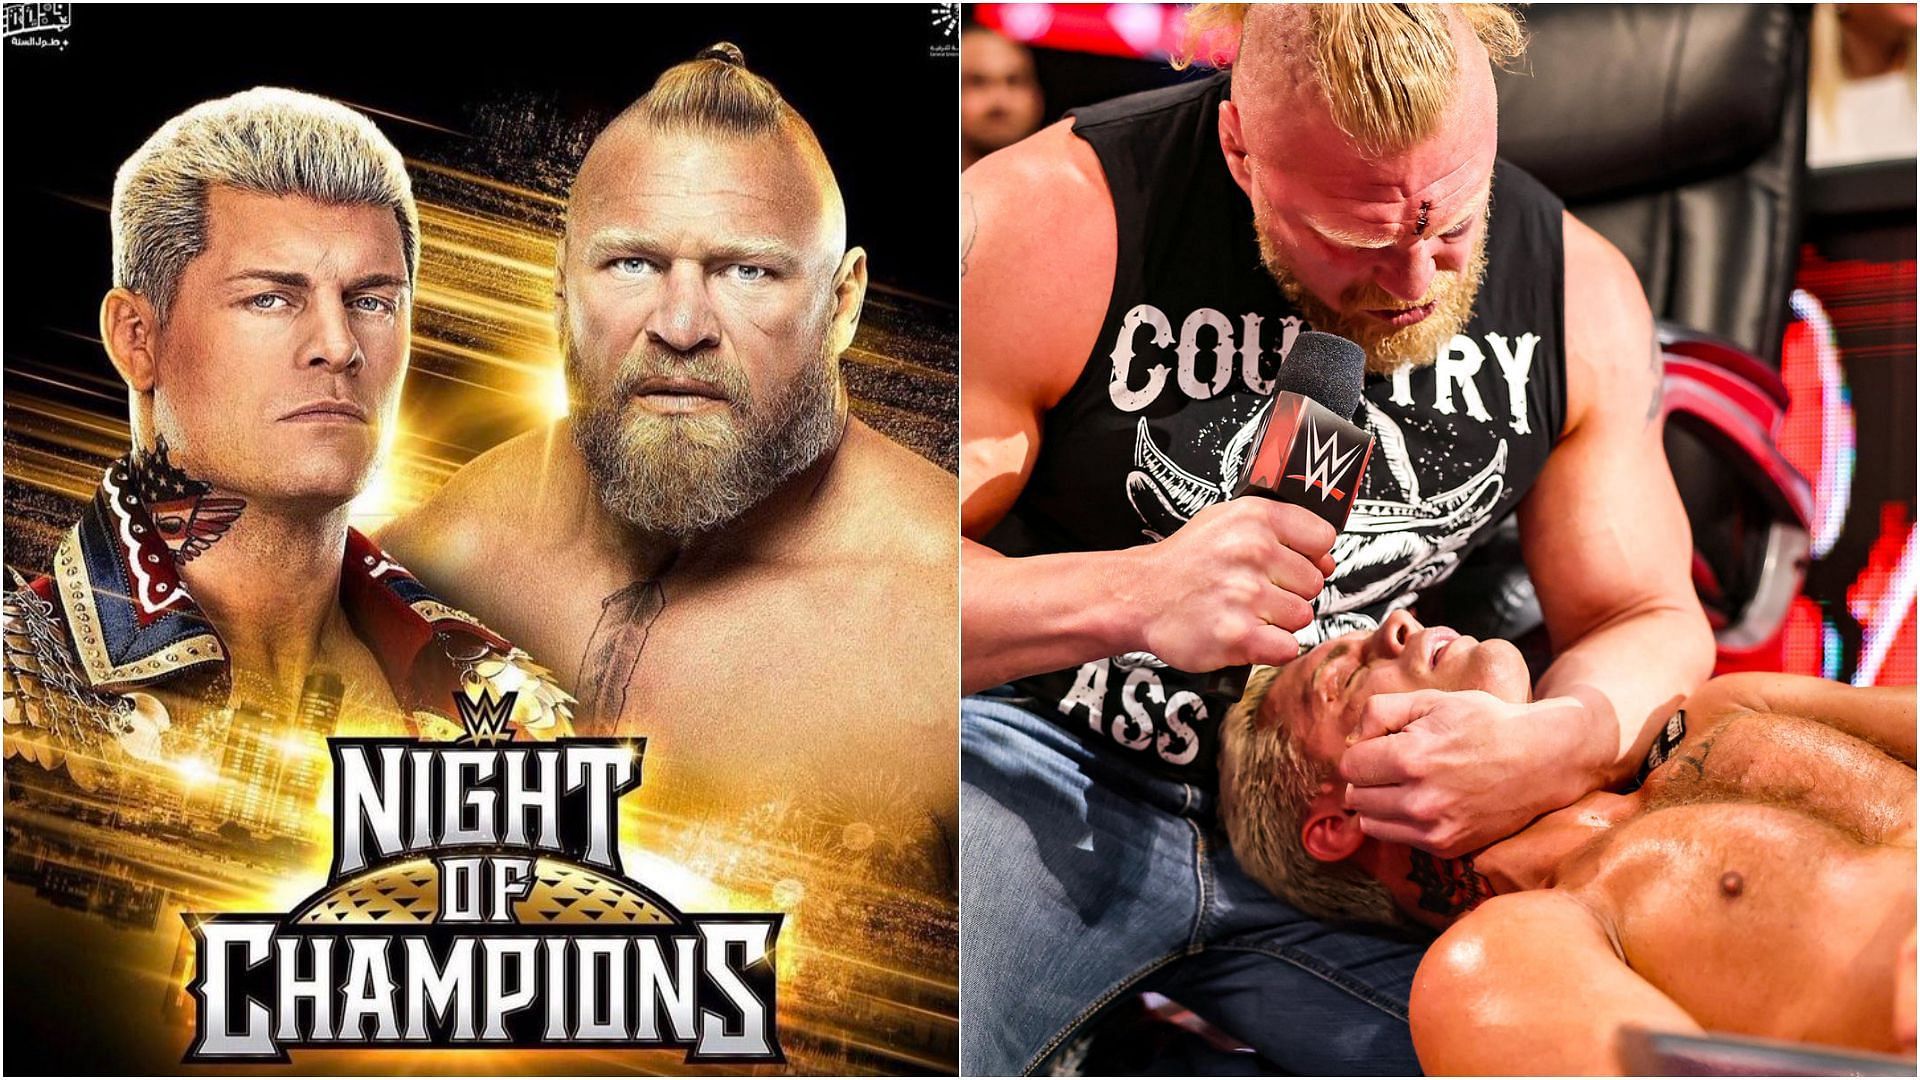 Rhodes vs. Lesnar II carries enough star power and animosity to headline any show.